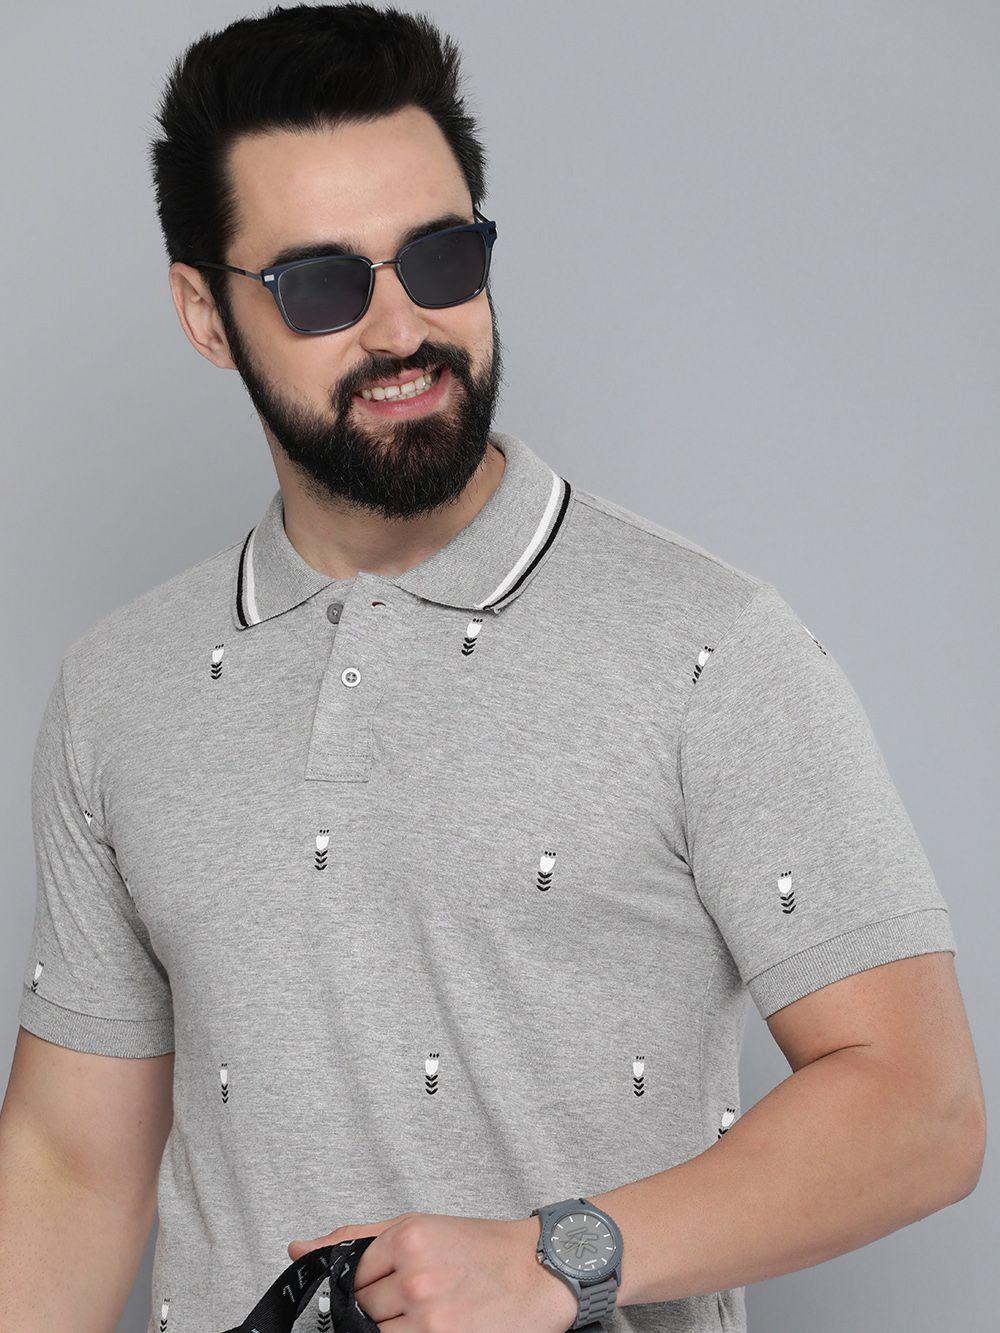 here&now floral printed polo collar pure cotton t-shirt